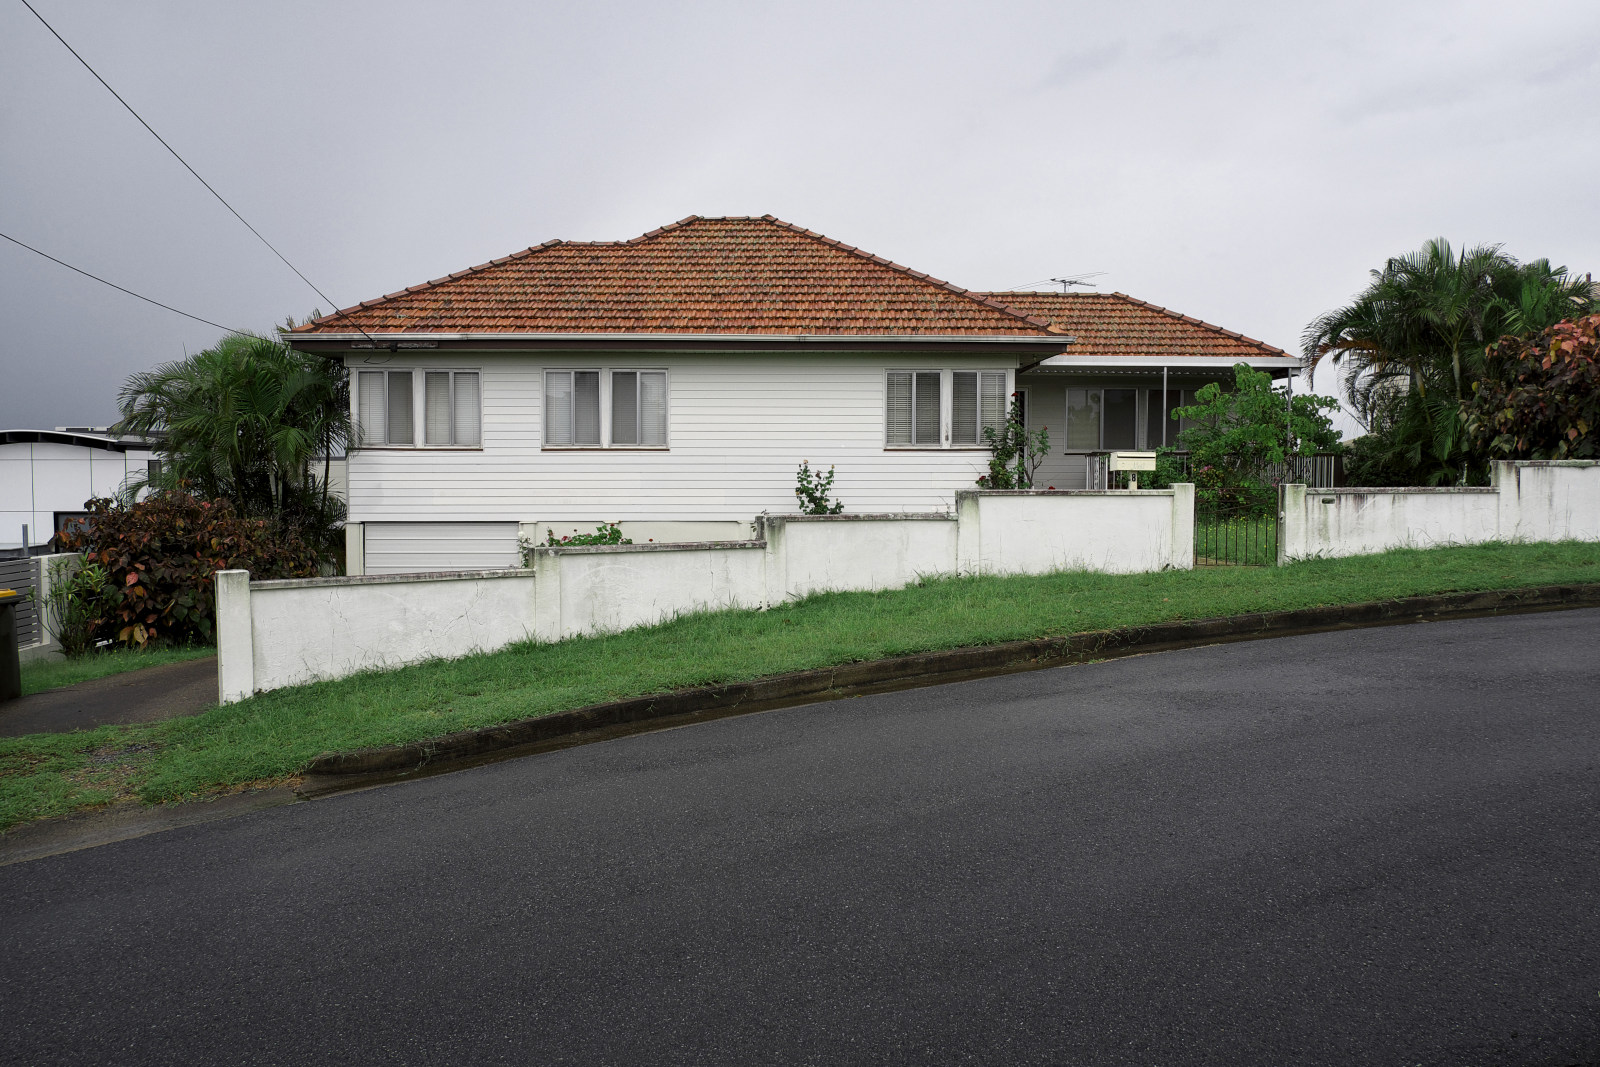 Lowset weatherboard home, curved stucco fence, Seven Hills. Brisbane vernacular architecture.